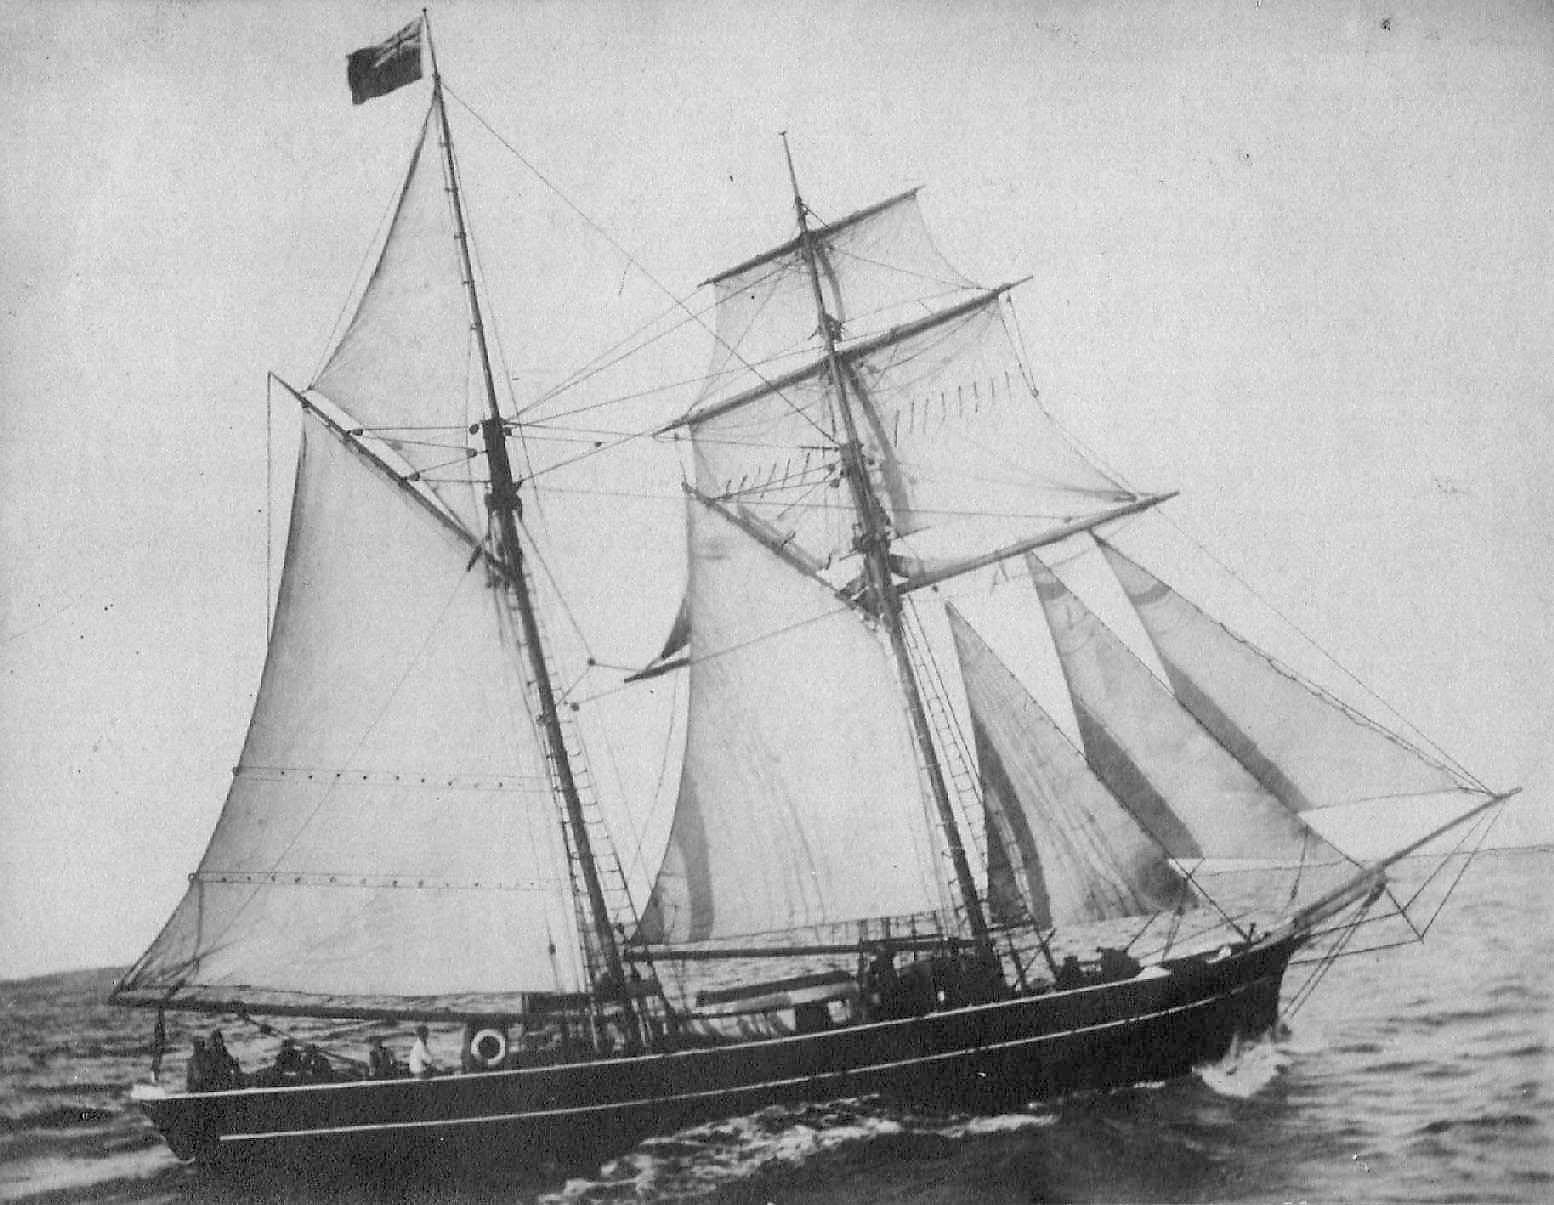 A wooden 2 masted Schooner "Eclipse", built in 1864.

Refer - "Ketches of South Australia" by R Parsons